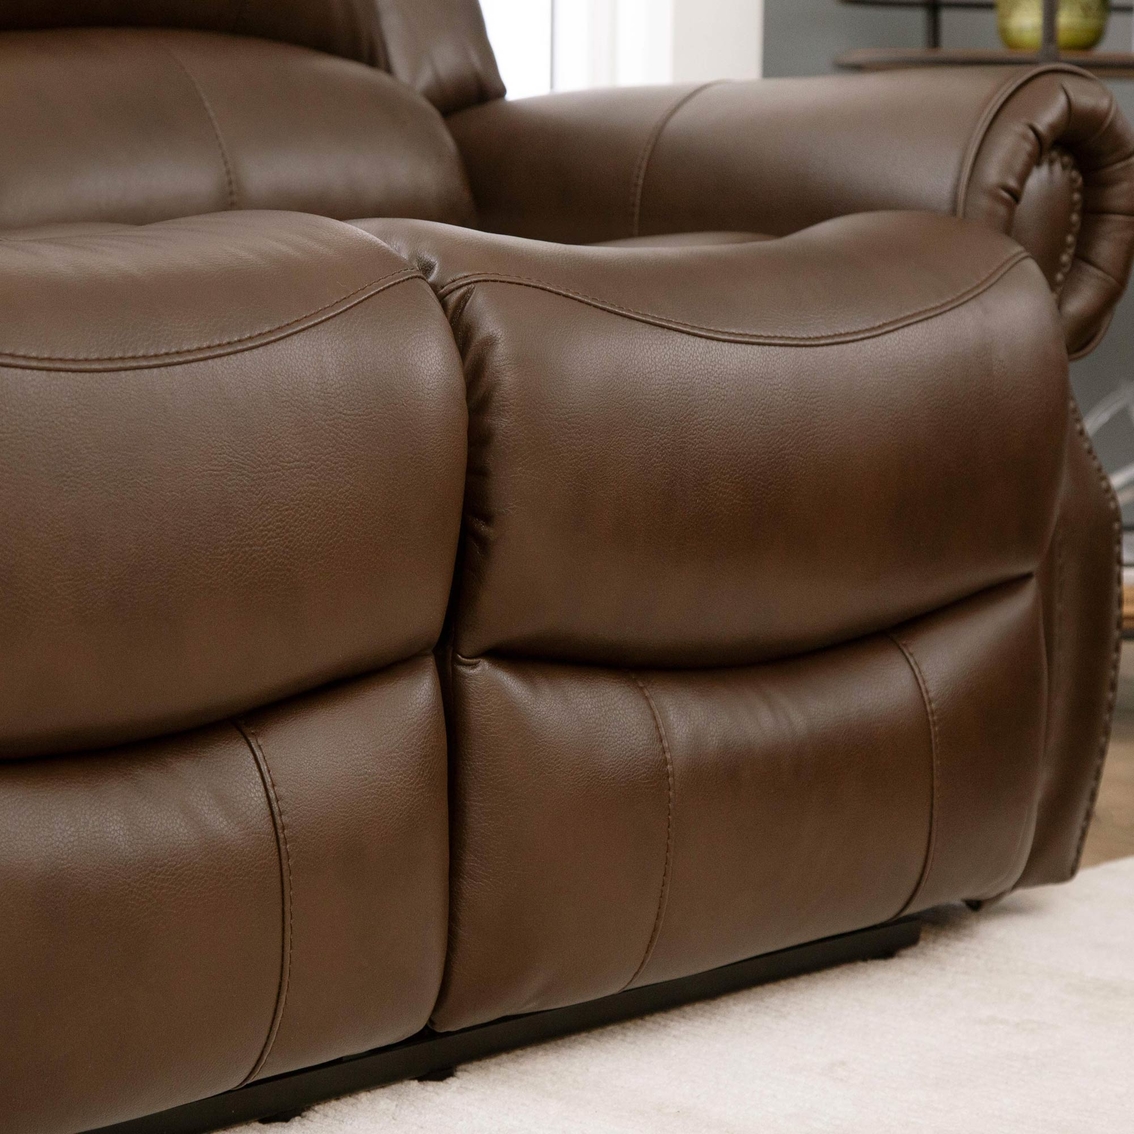 Abbyson Living Calabasas Leather Reclining, 3 pc. Set - Image 6 of 9